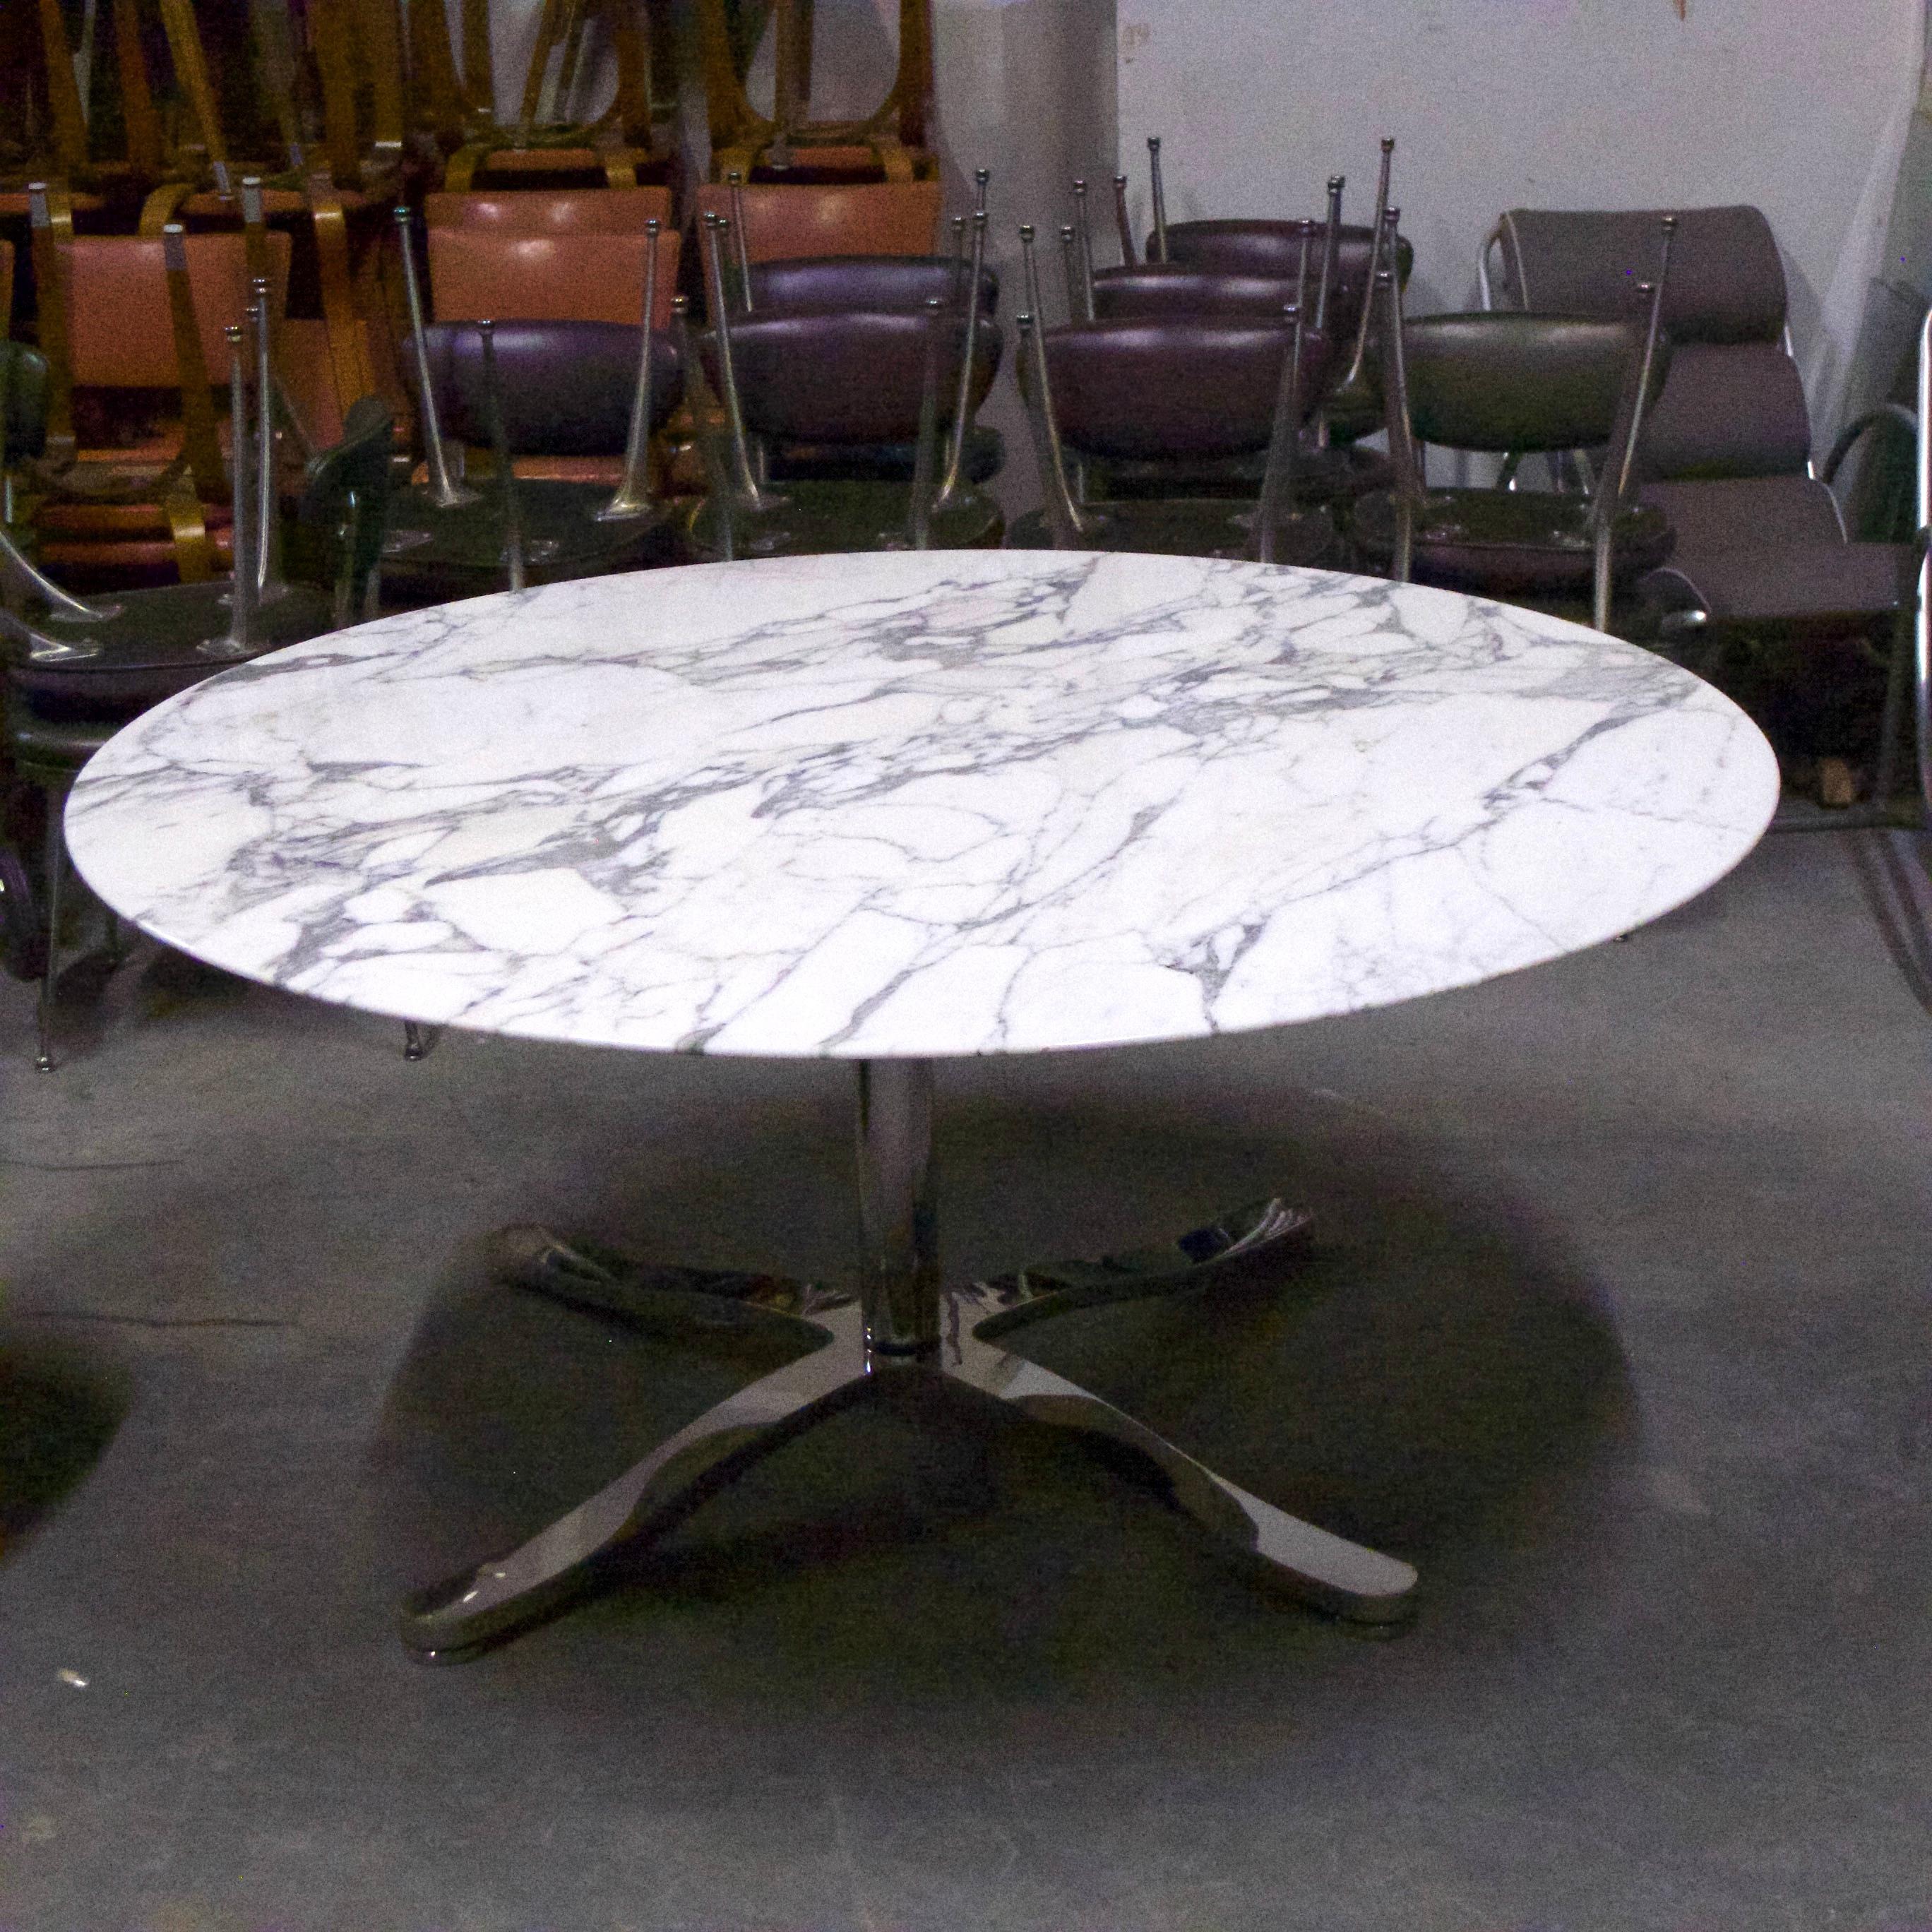 A very impressive and versatile Nicos Zographos Alpha table that could function as a dining, center, or conference table. The top is a beautiful single piece of 5 foot diameter Italian Calacatta marble stone with a beveled edge supported by a